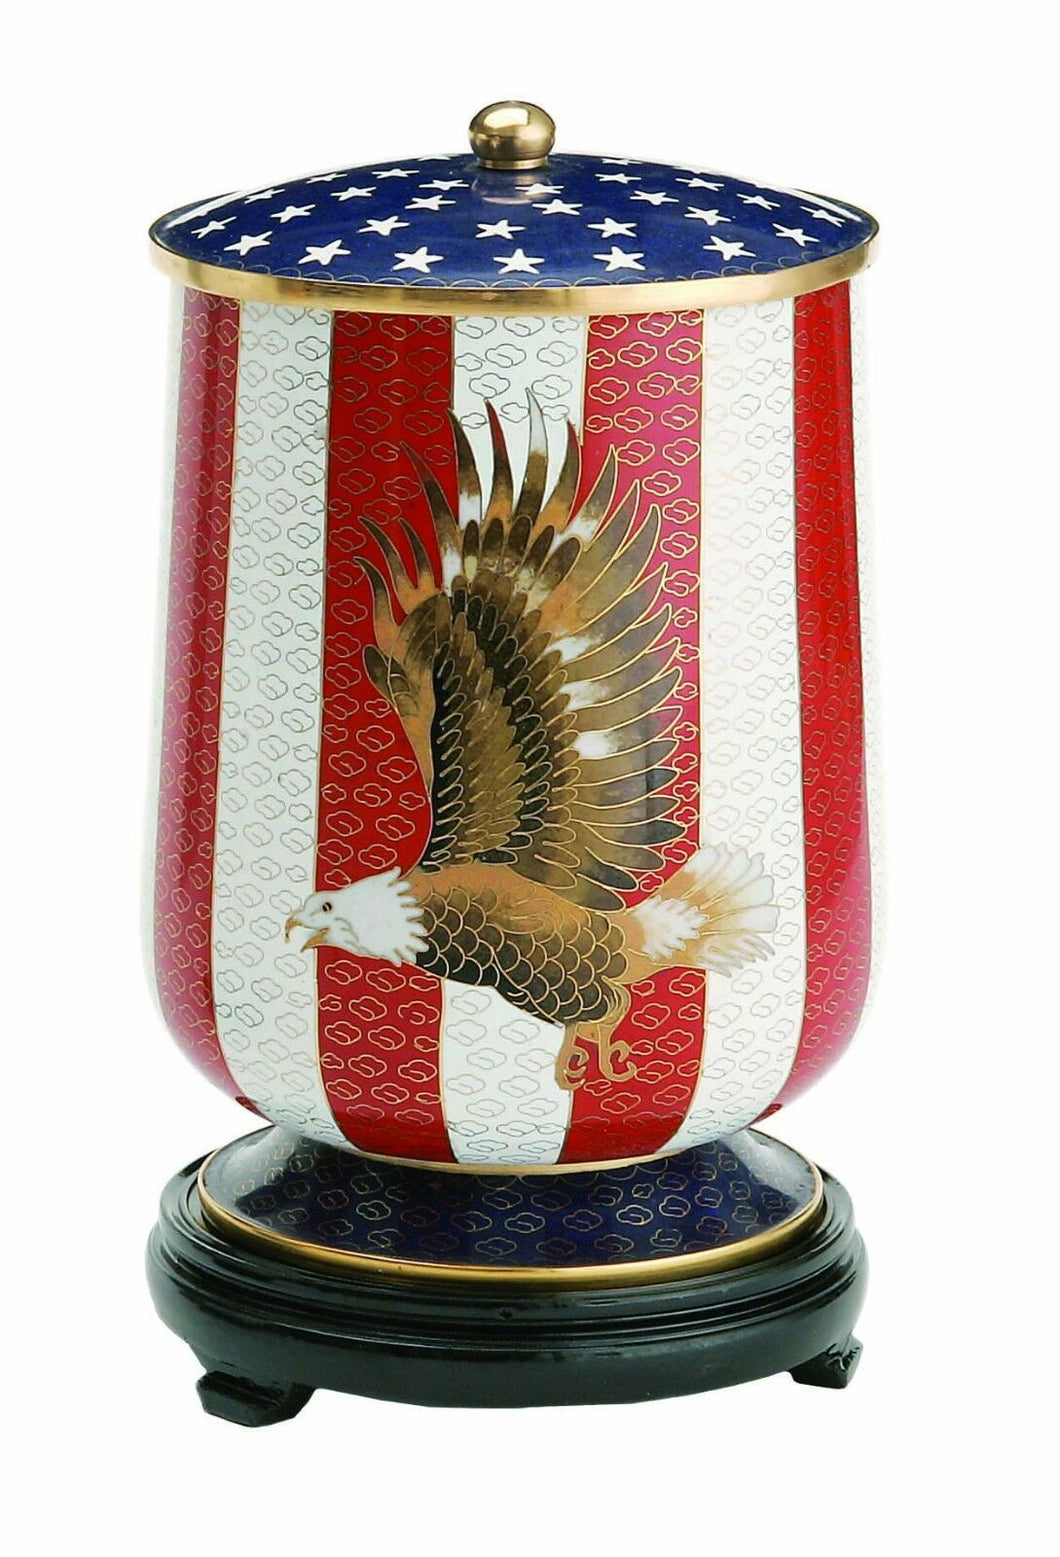 Large/Adult 220 cubic inches Flag & Eagle Cloisonne Cremation Urn for Ashes